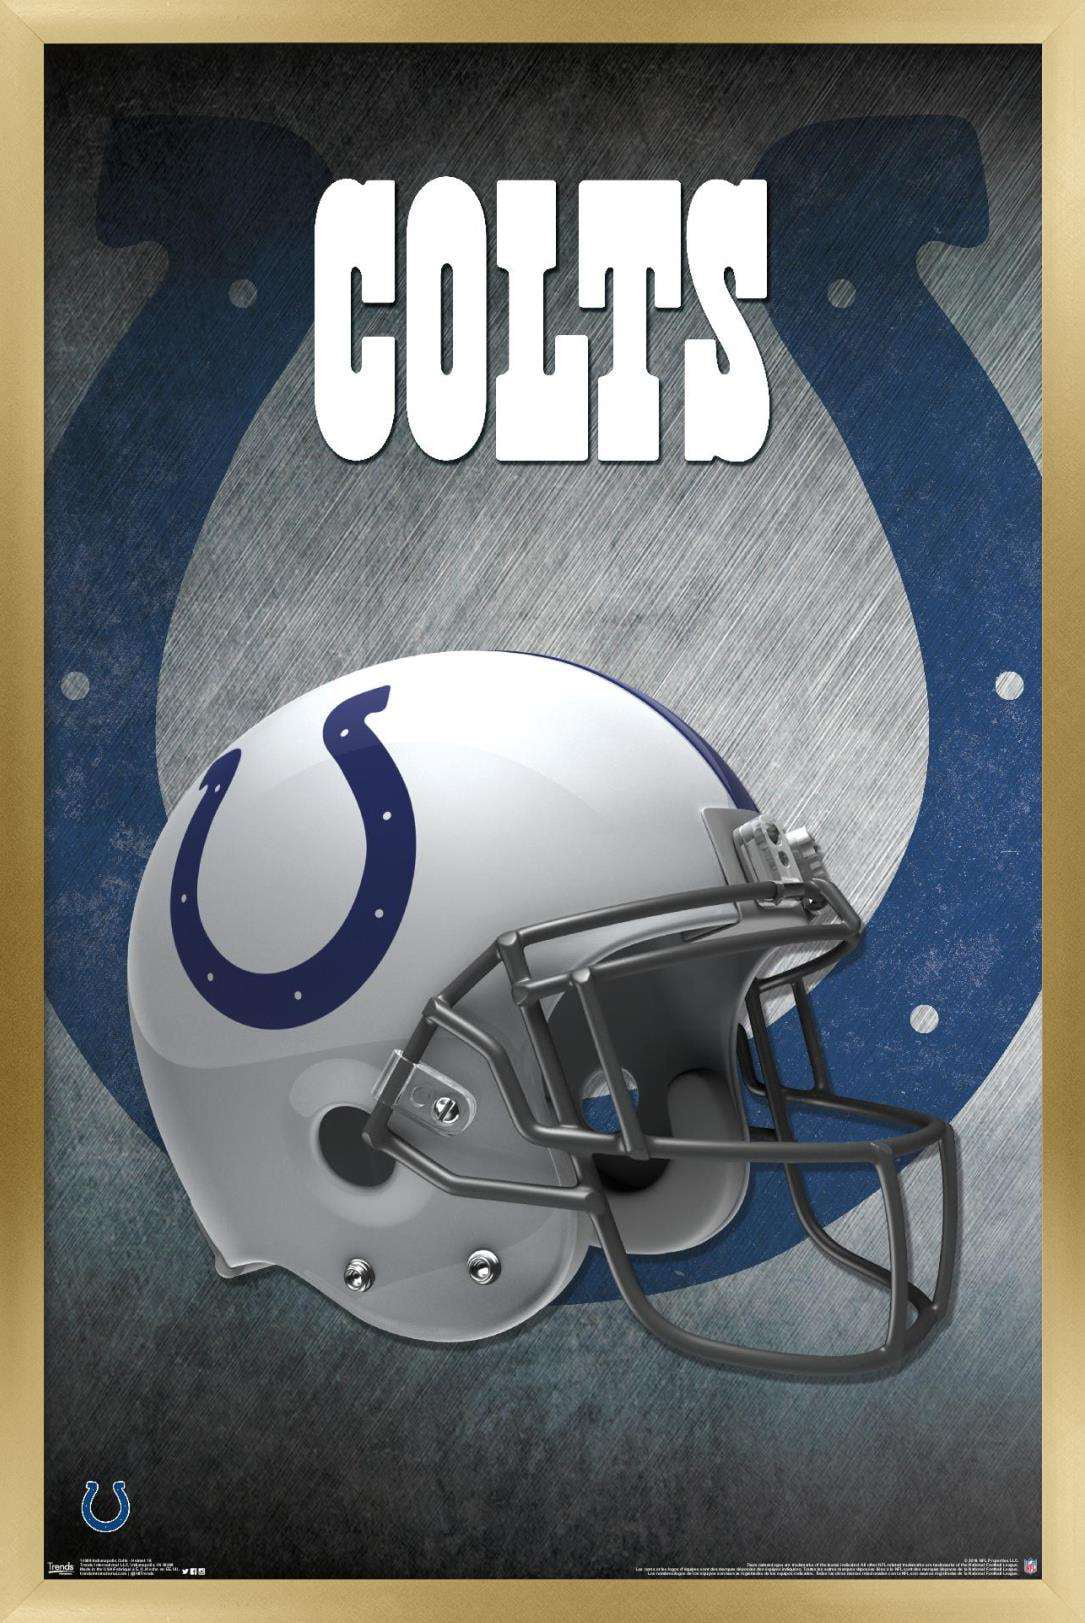 Multi 24.25 X 35.75 Trends International Indianapolis Colts-Retro Logo Wall Poster